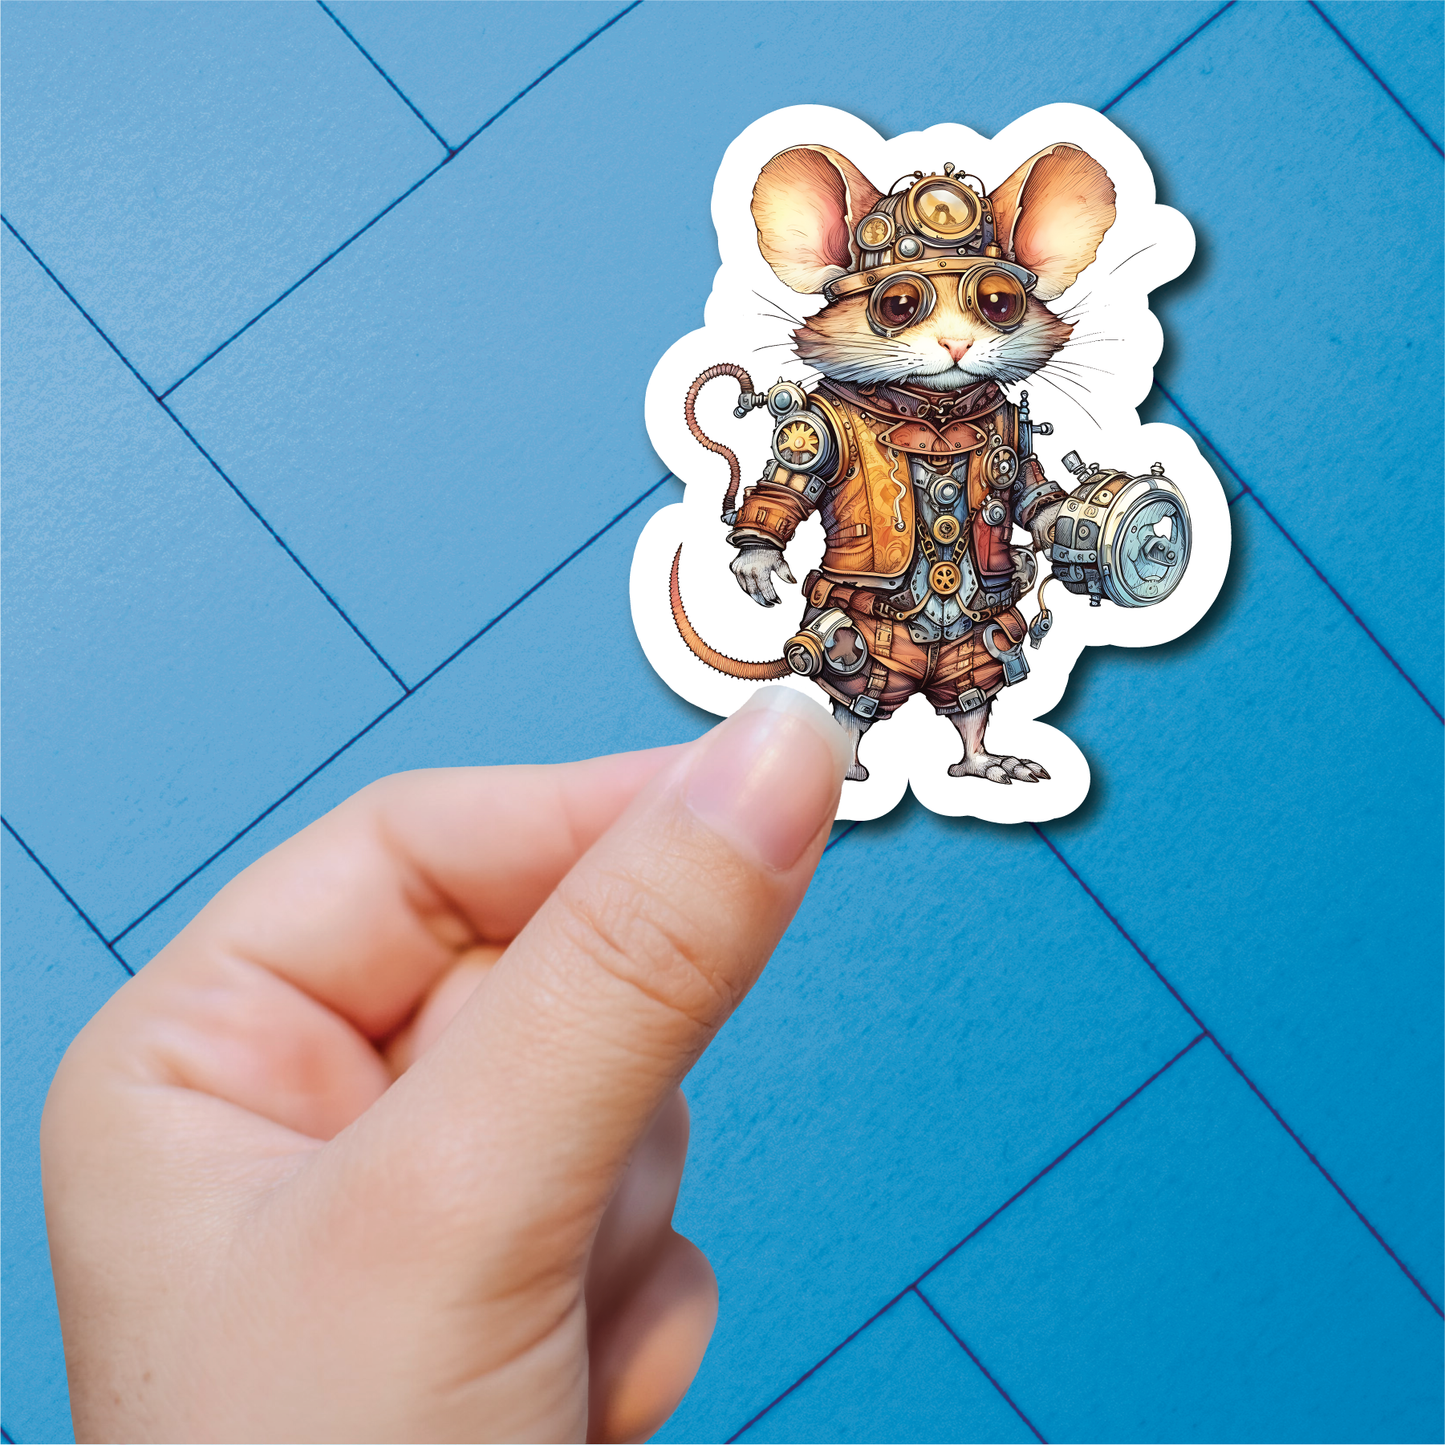 Steampunk 2 - Full Color Vinyl Stickers (SHIPS IN 3-7 BUS DAYS)